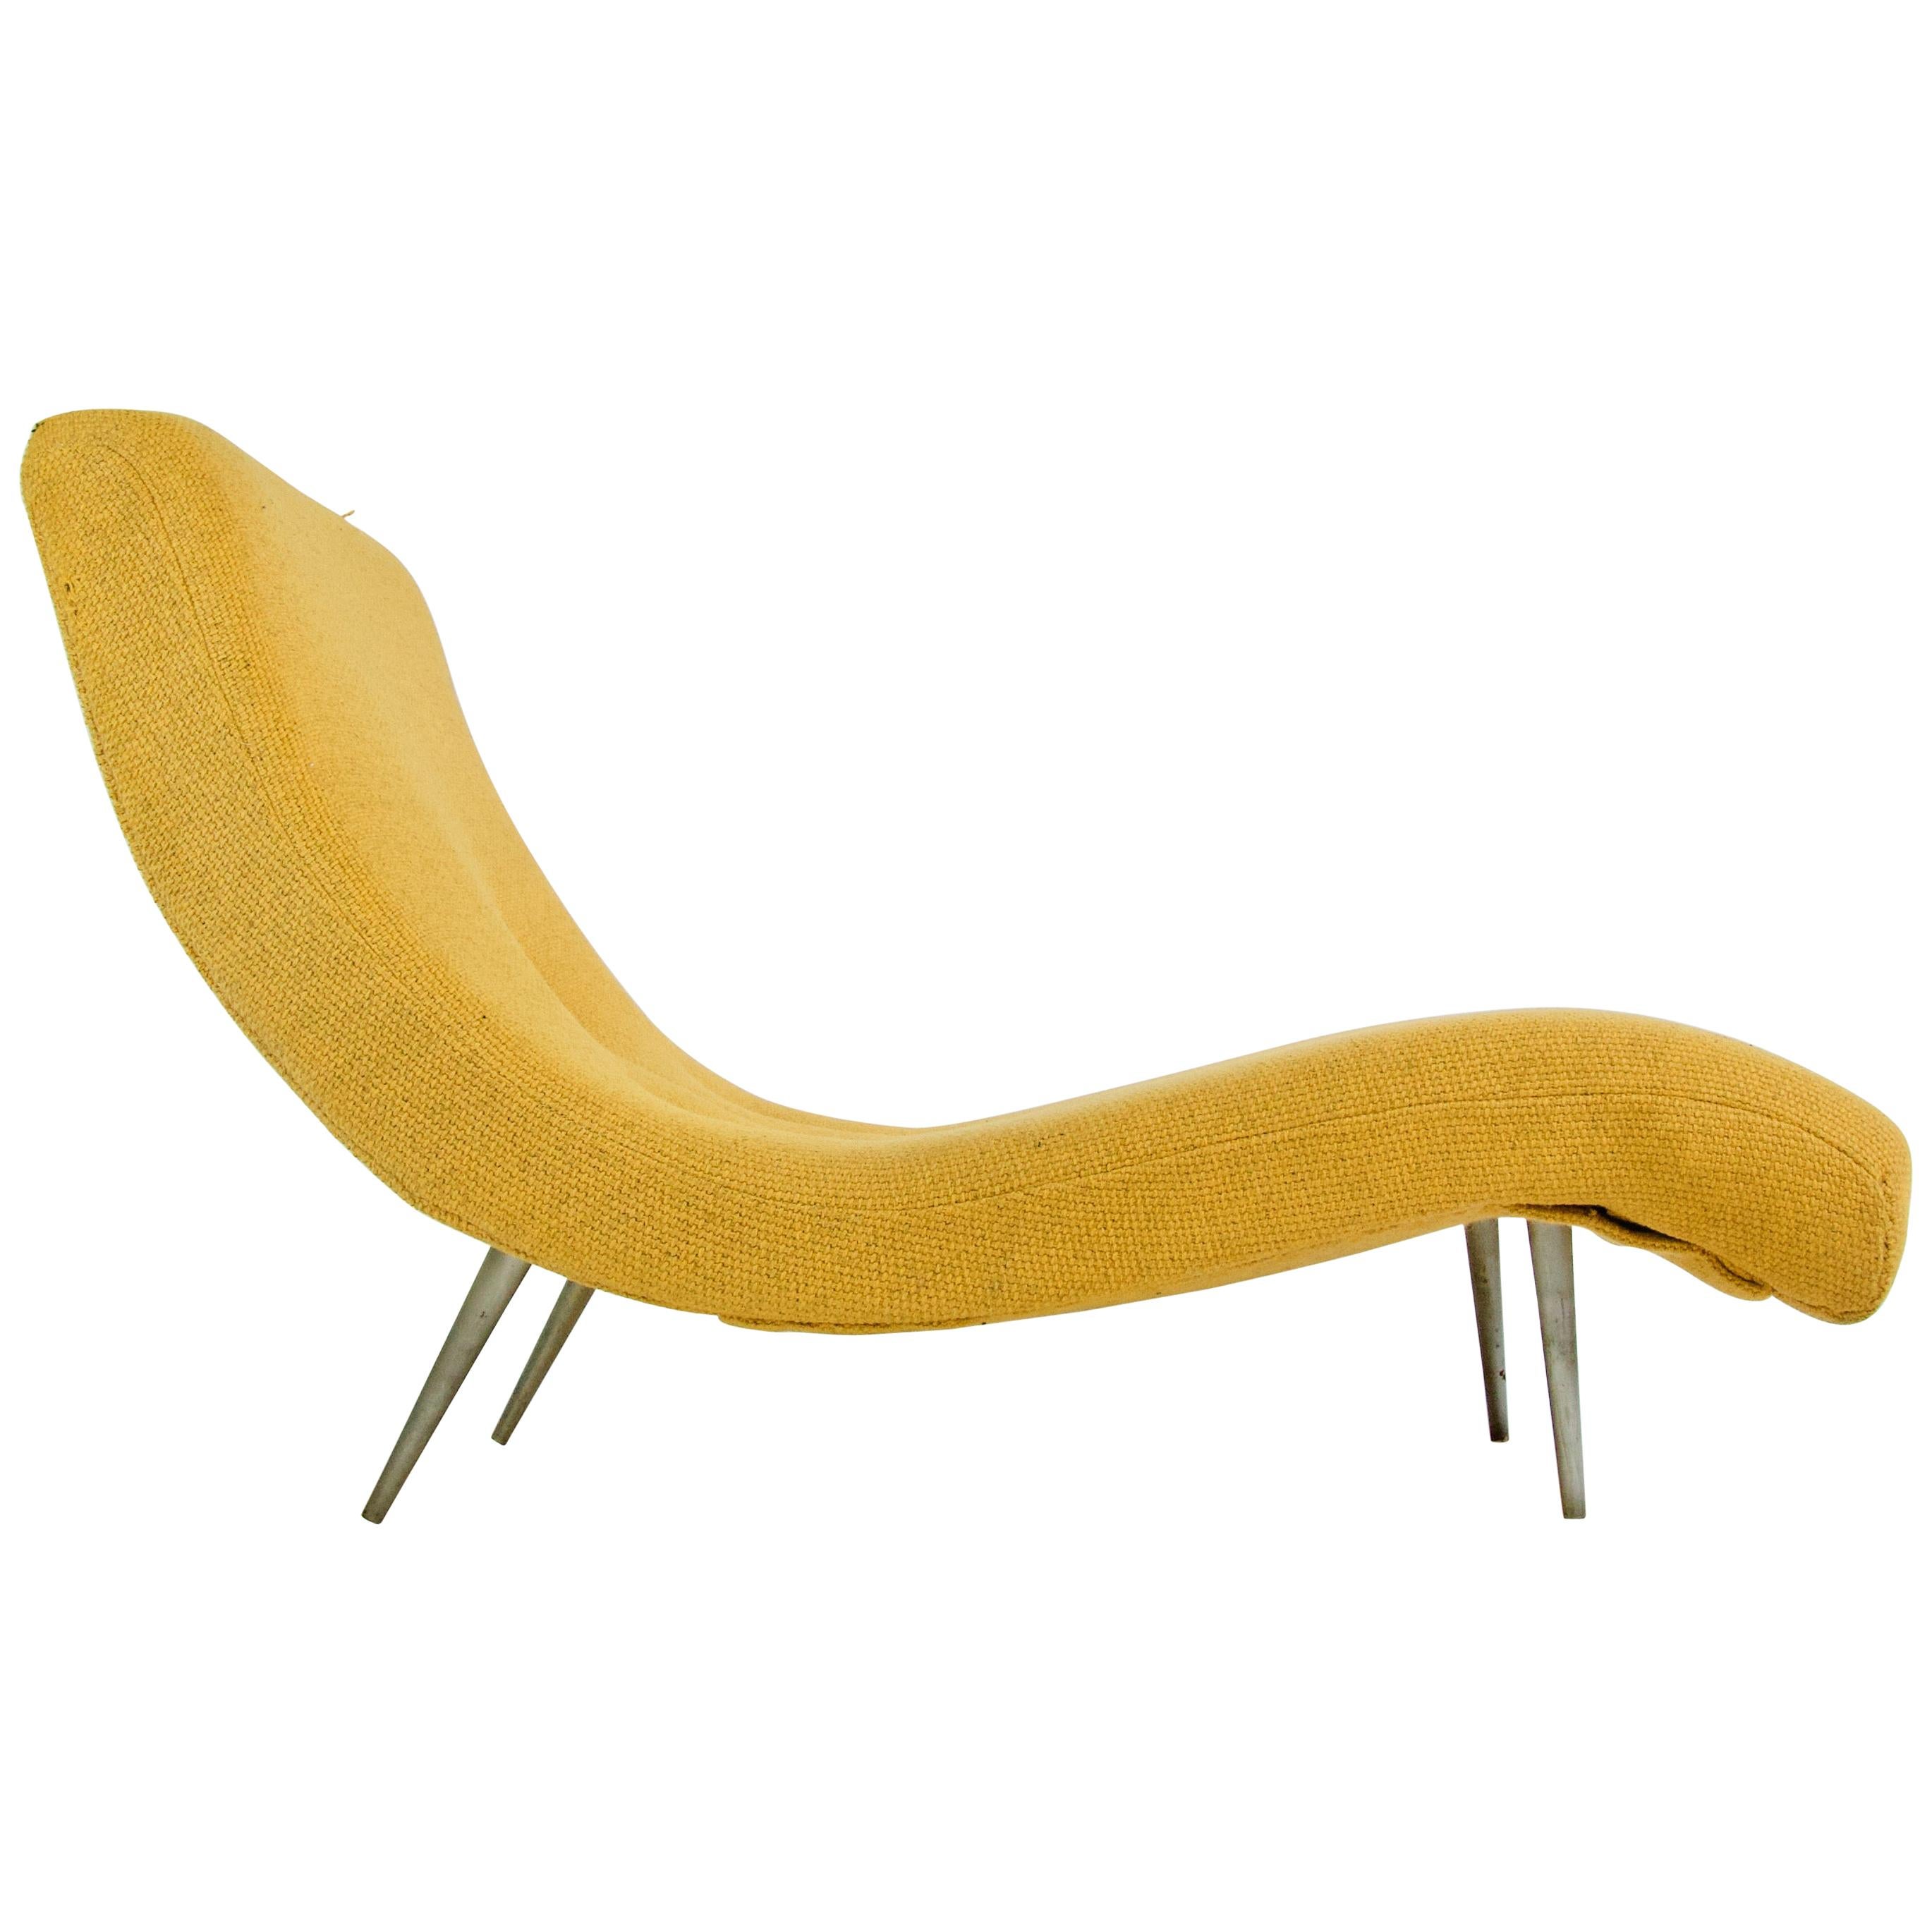 Adrian Pearsall for Craft Associates Chaise Lounge im Angebot